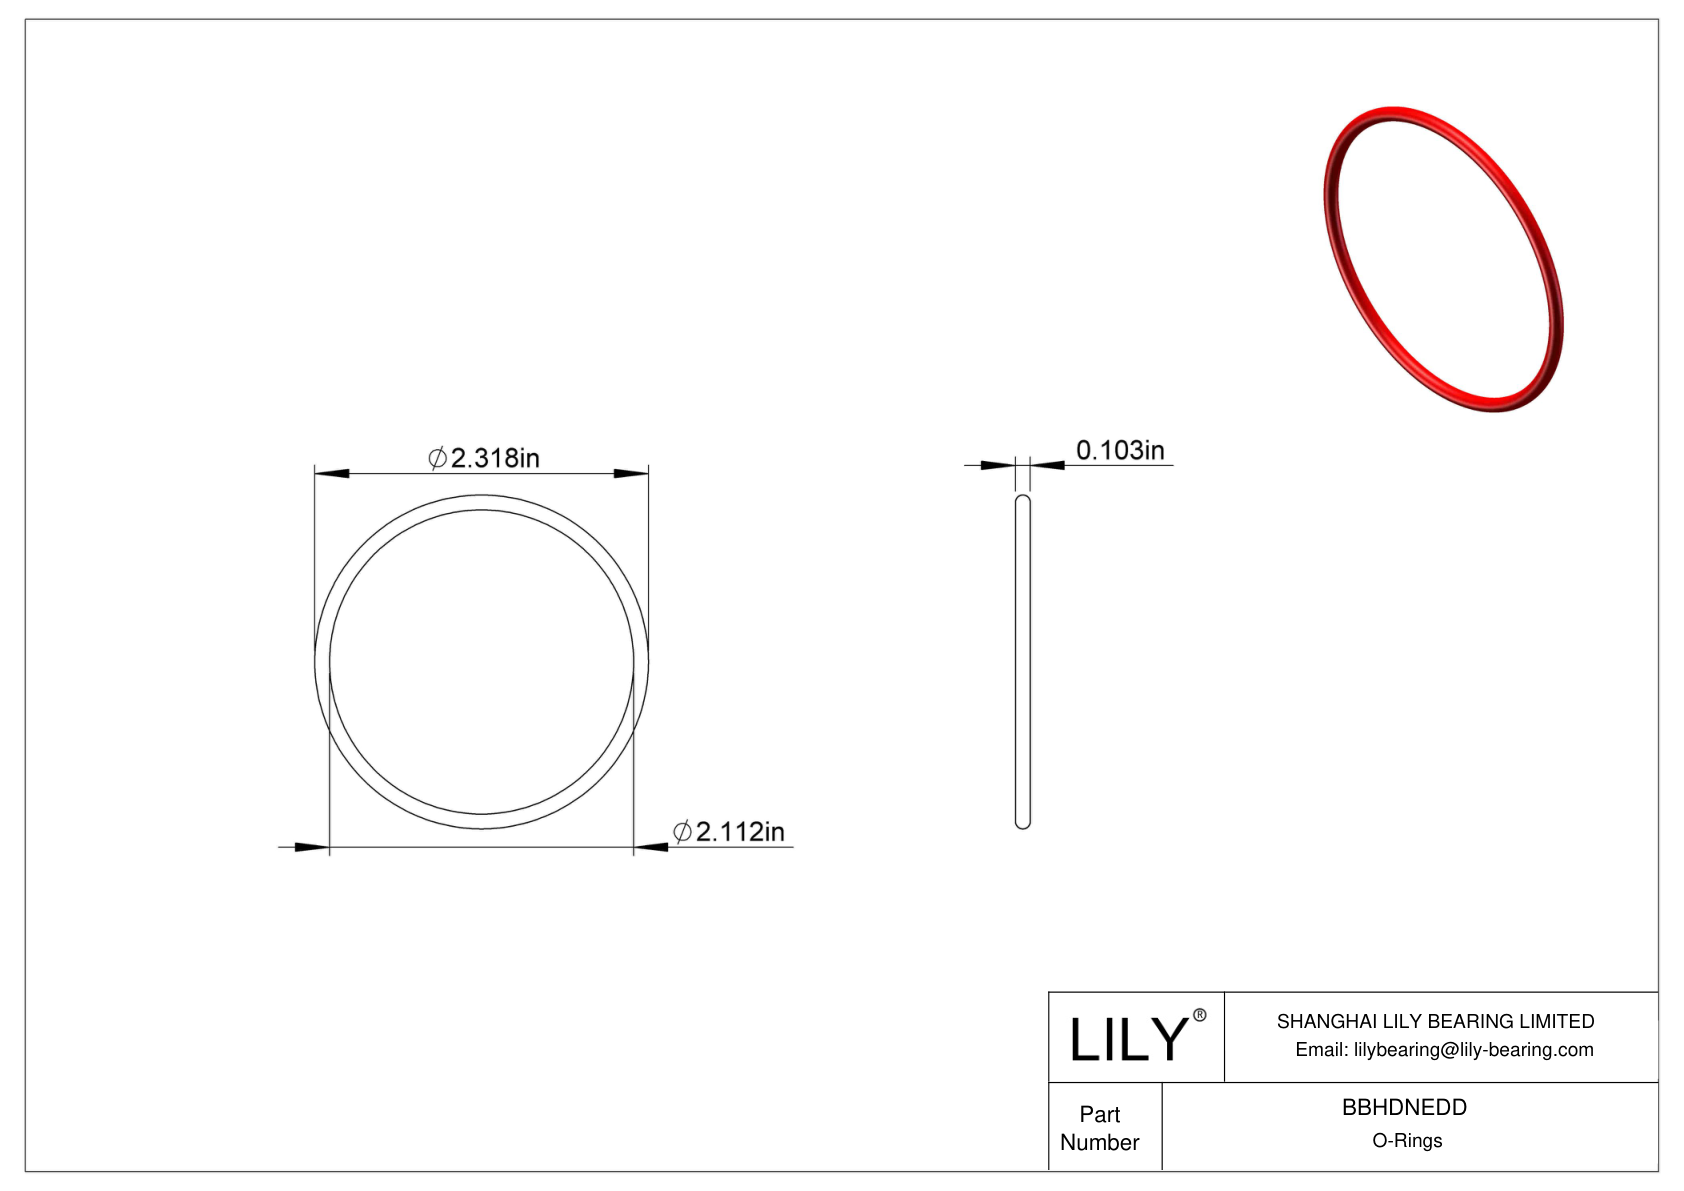 BBHDNEDD High Temperature O-Rings Round cad drawing